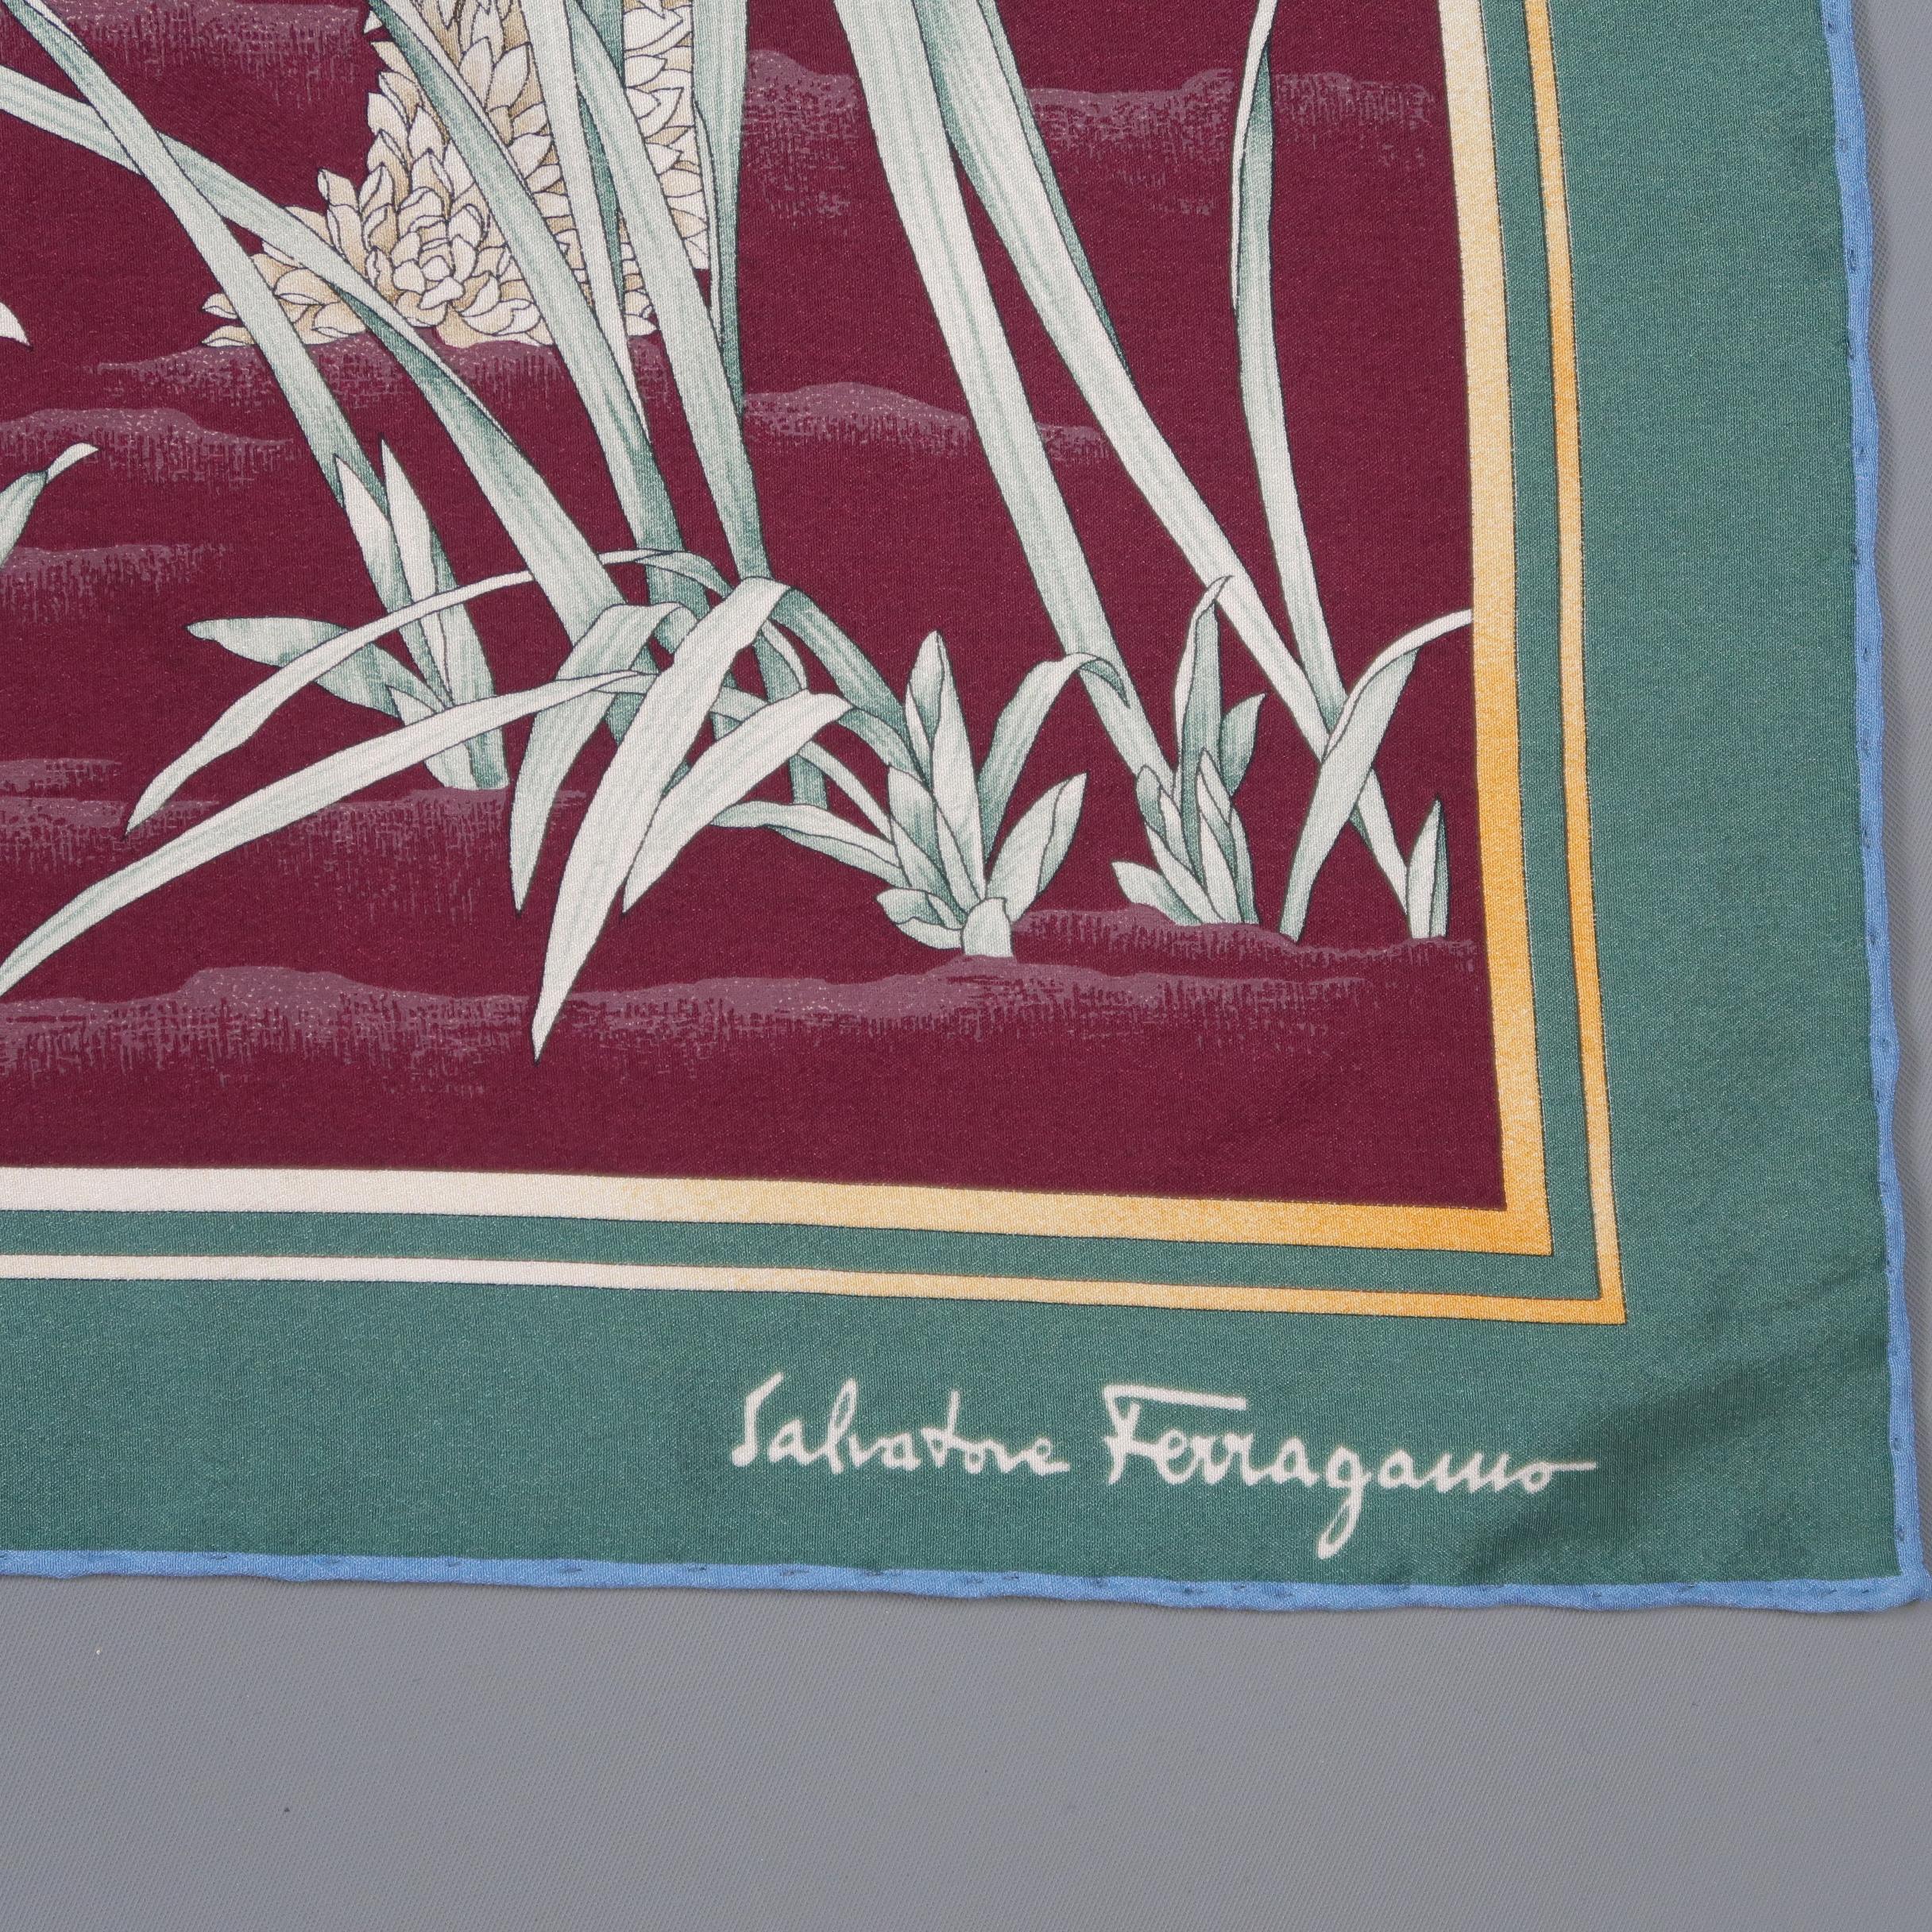 Vintage SALVATORE FERRAGAMO scarf comes in burgundy silk chiffon with teal trim and a floral dog with duck print. Discolorations shown in detail shots. As-is. With original packaging. Made in Italy.
 
Good Pre-Owned Condition.
 
90 x 90 cm.